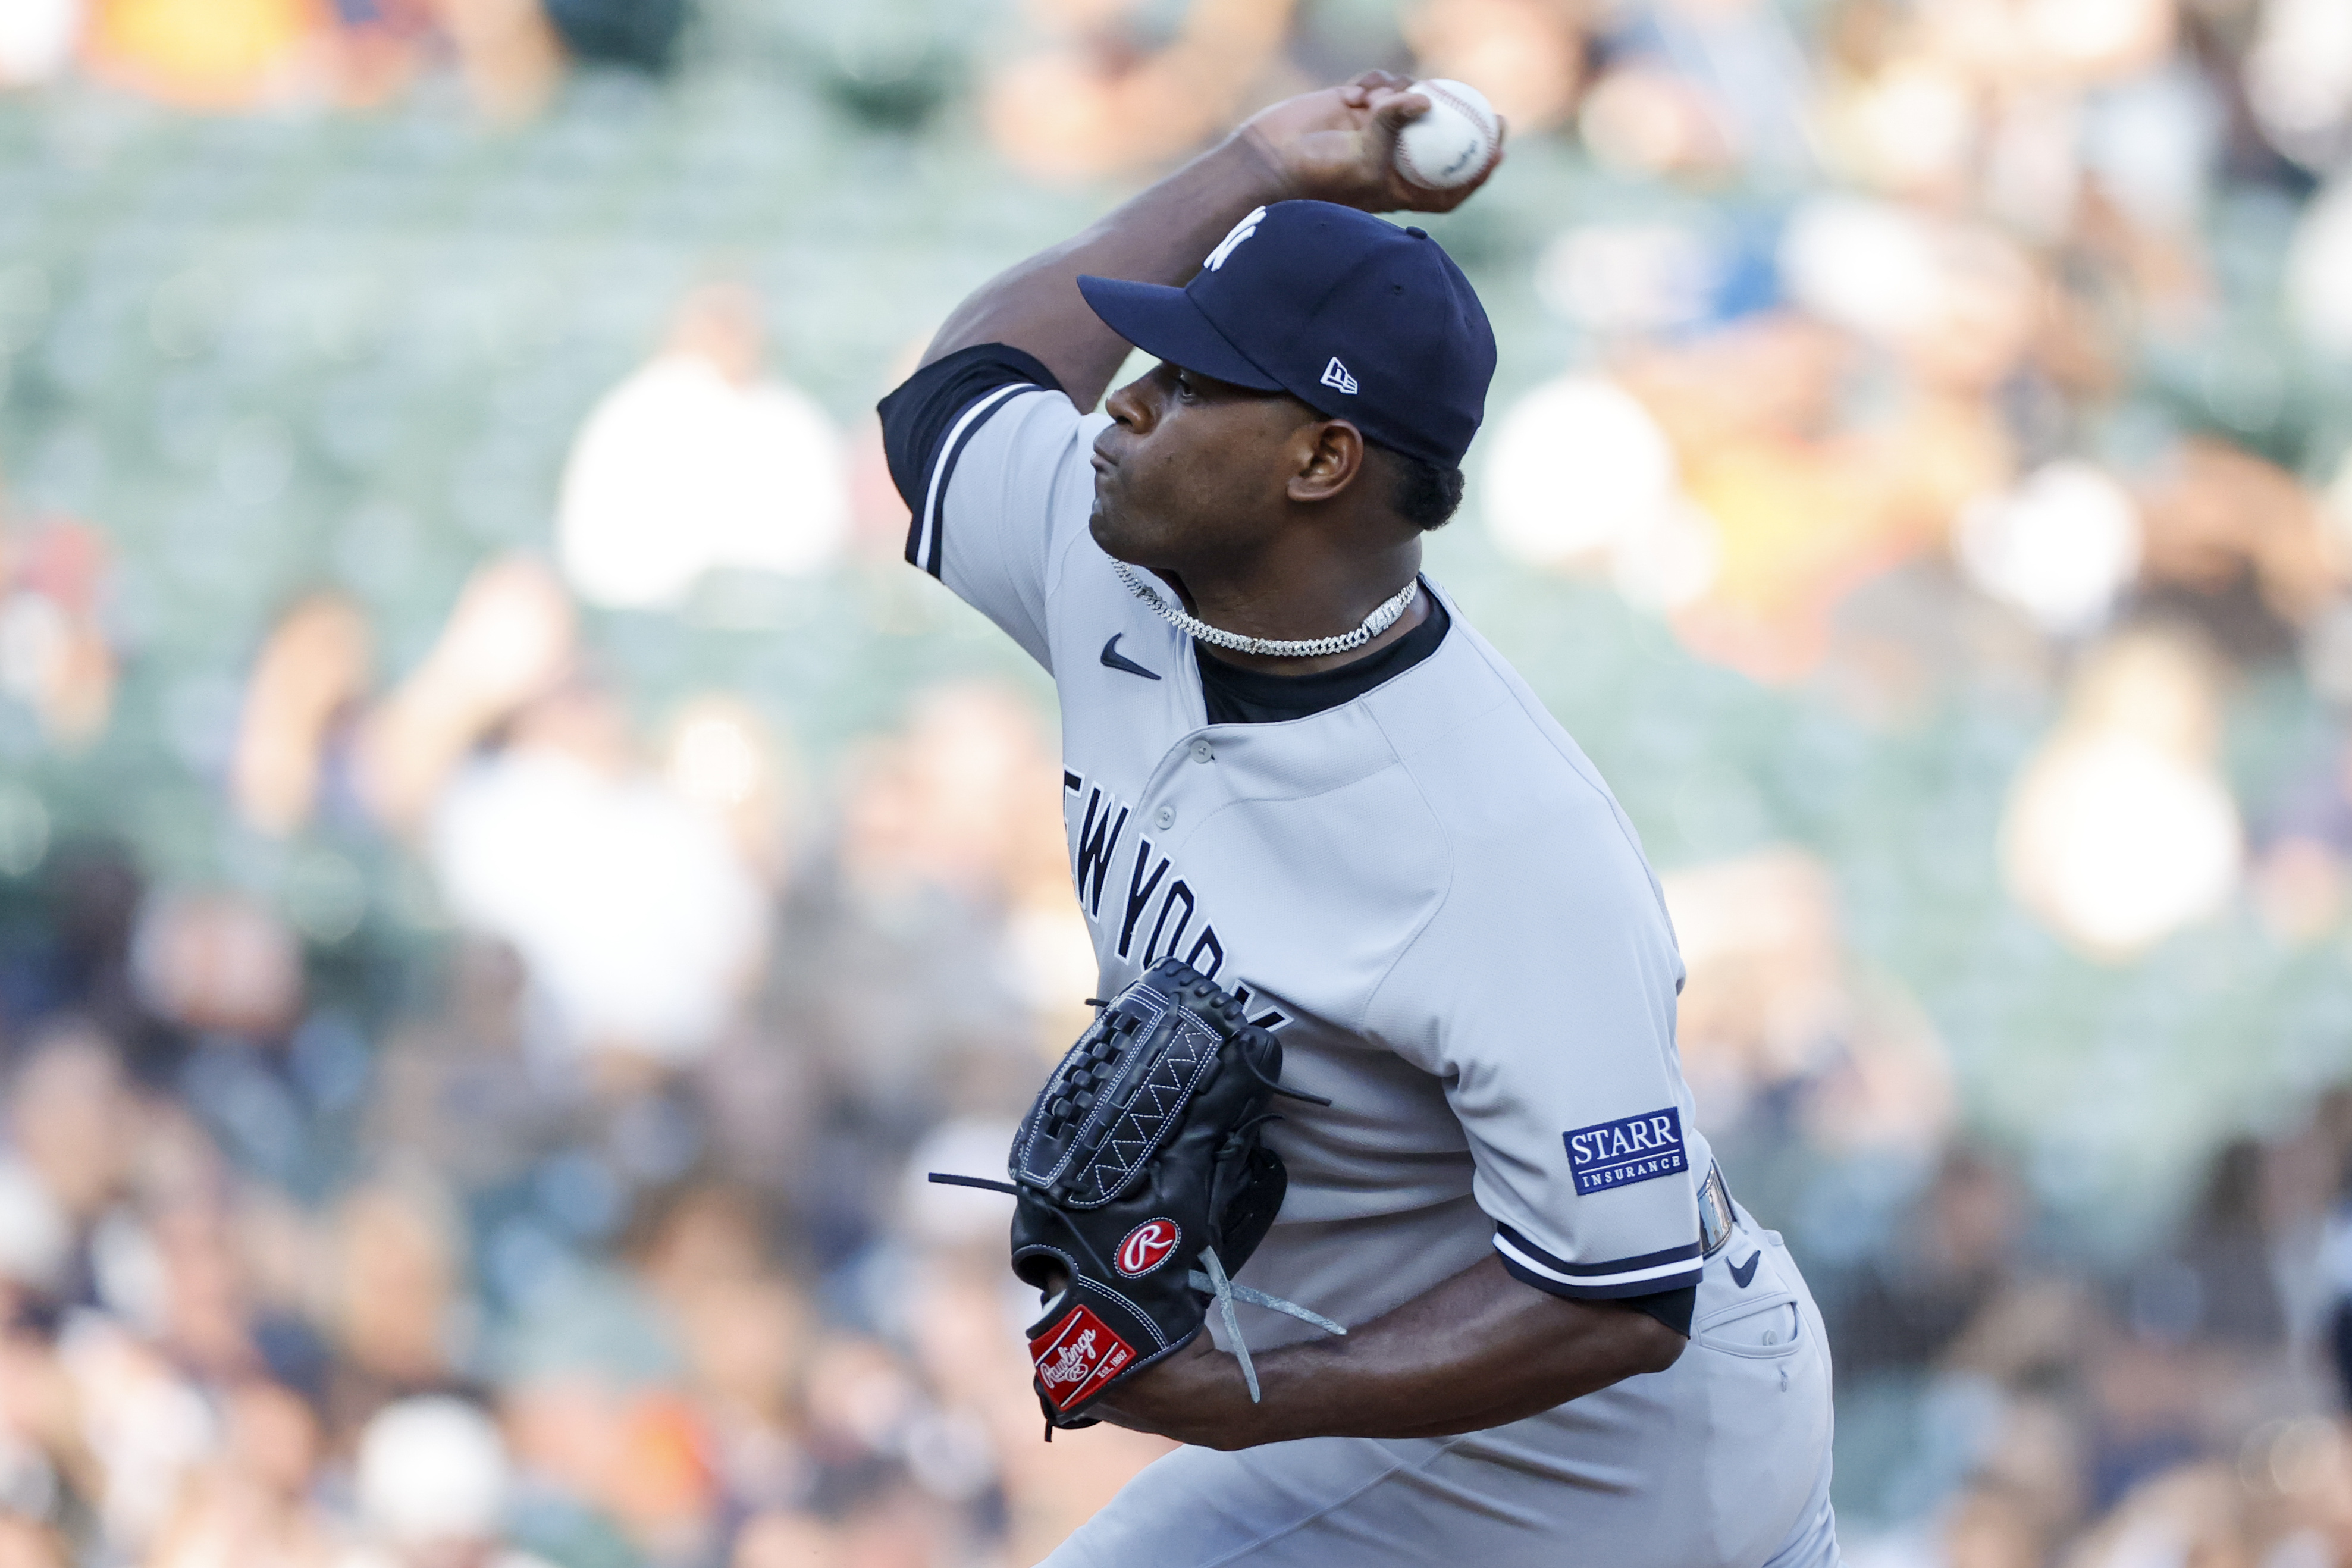 Luis Severino in the first inning tonight.